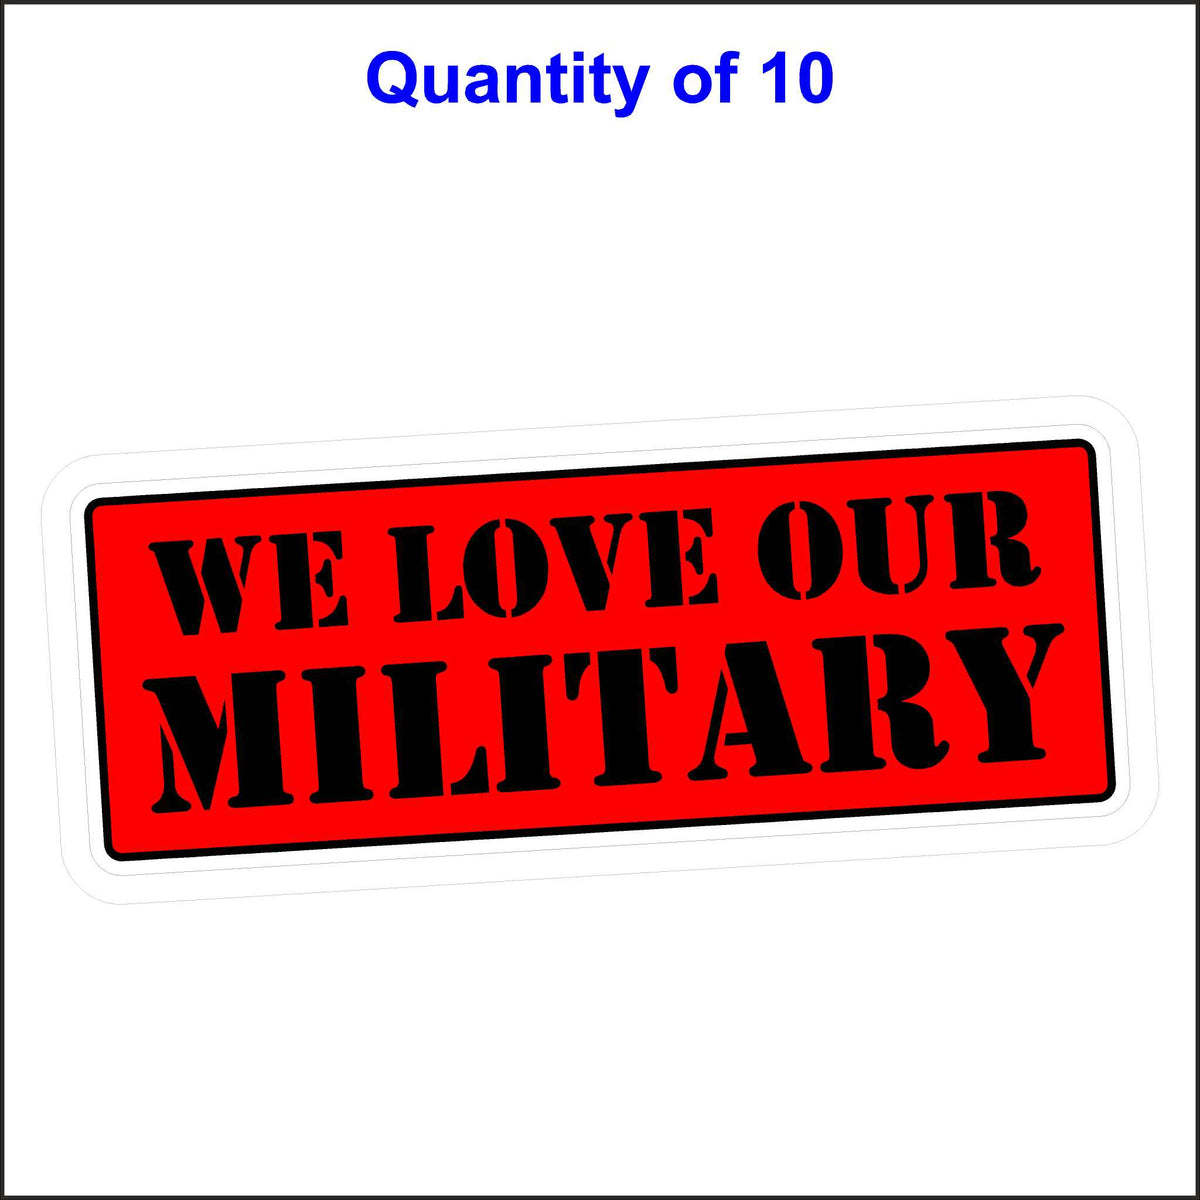 Military Stickers - We Love Our Military. 10 Quantity.